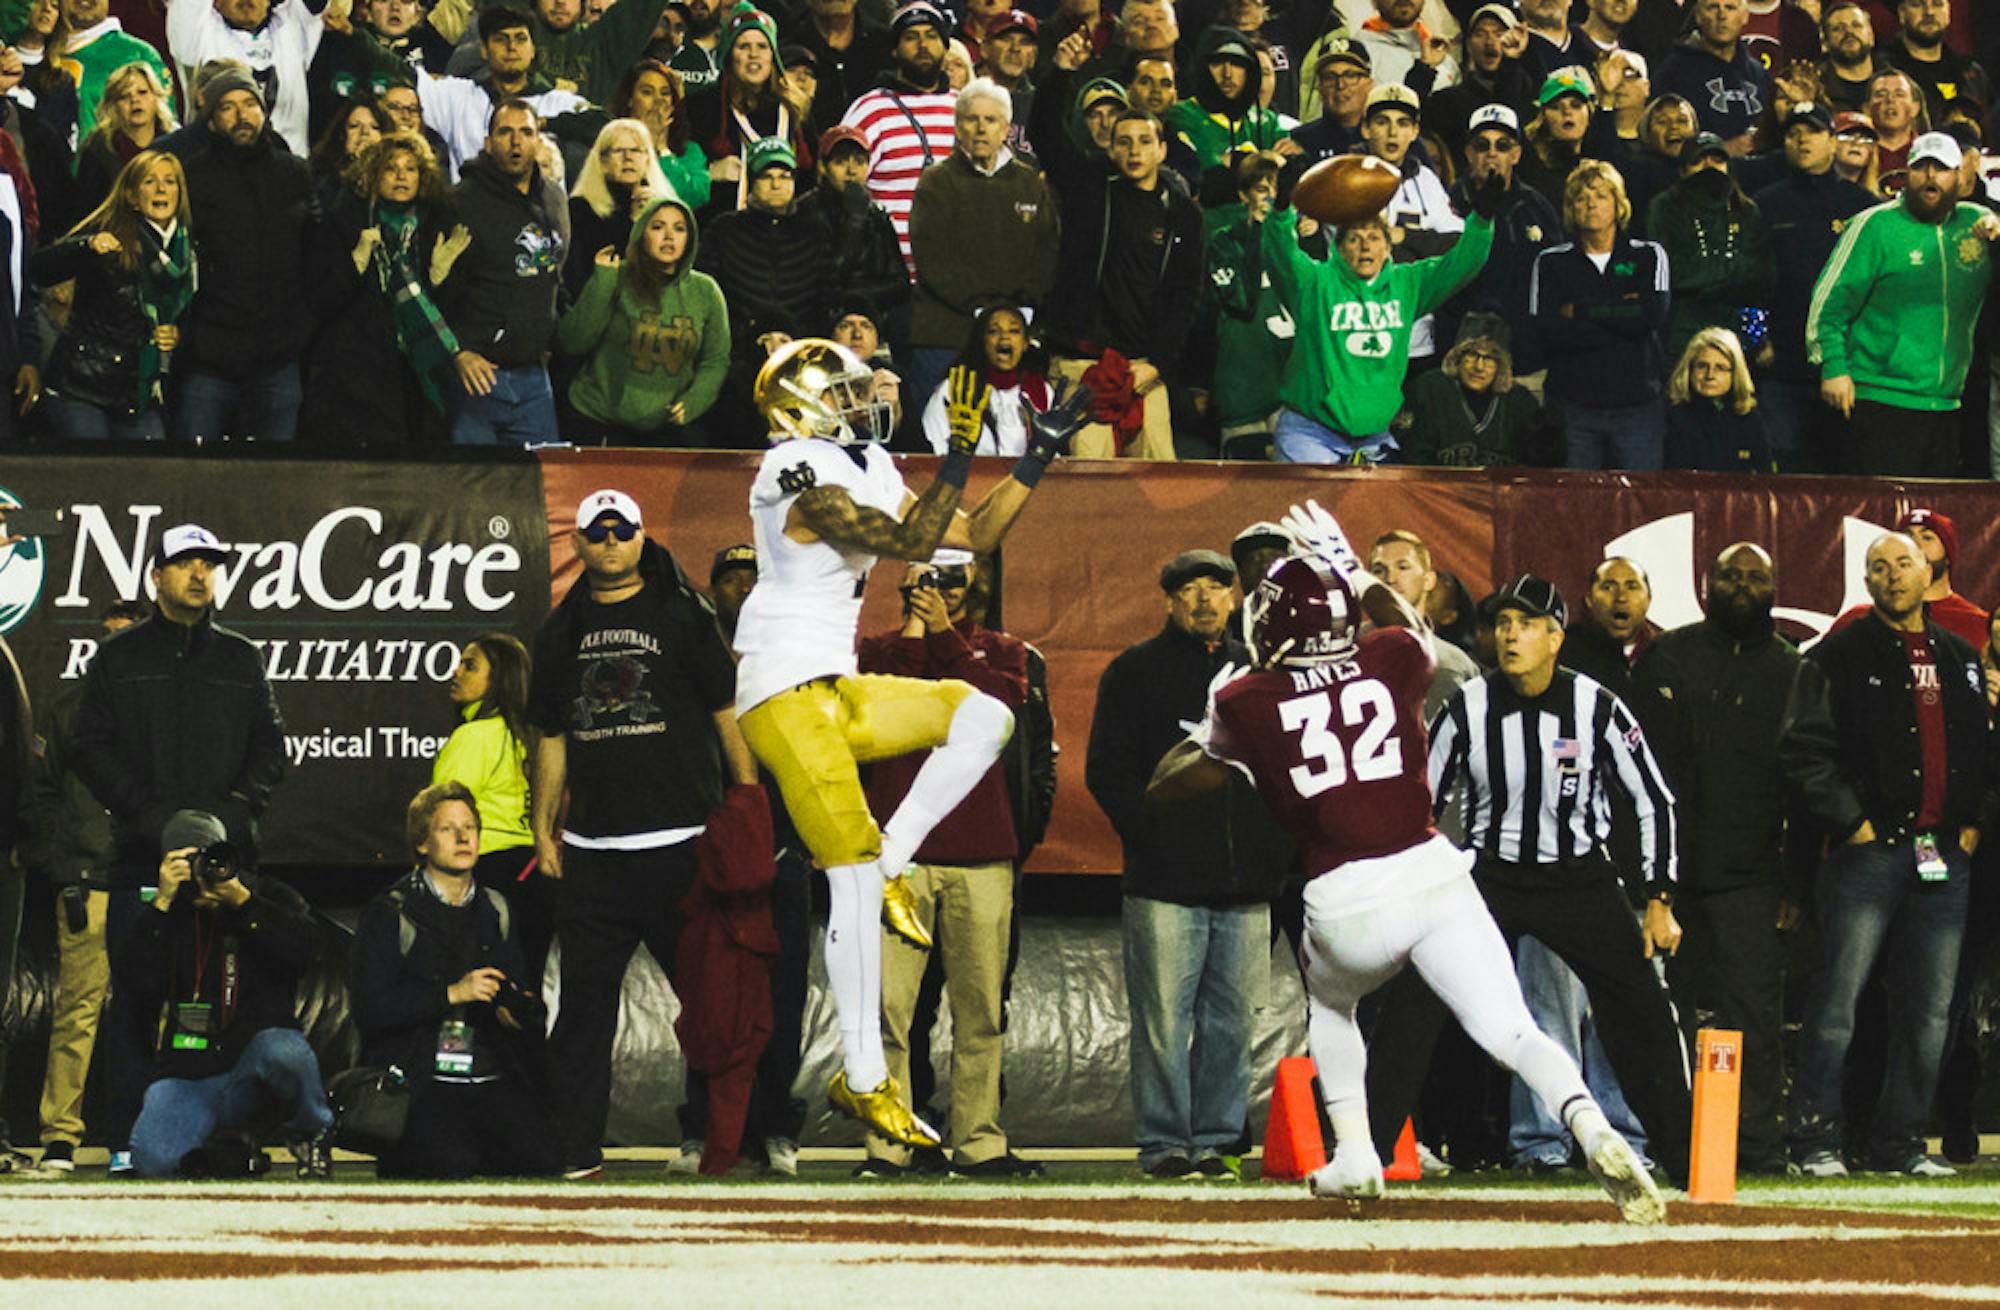 Irish junior receiver Will Fuller jumps to catch the game-winning touchdown pass with 2:09 left in Notre Dame’s 24-20 win over Temple on Oct. 31.